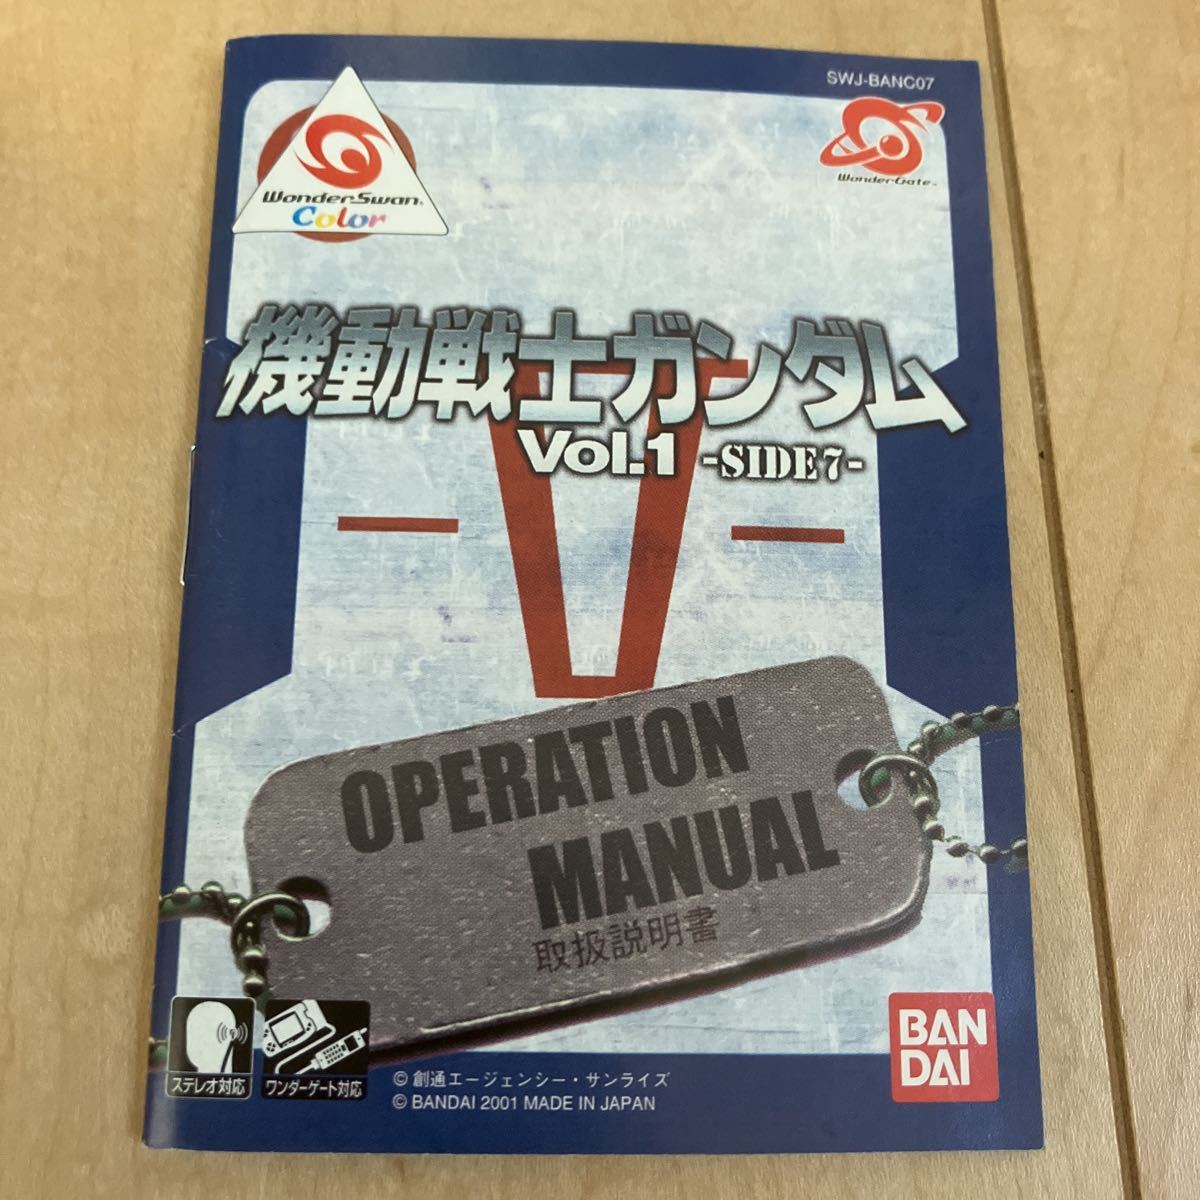  soft less attention [ Mobile Suit Gundam vol.1 SIDE7] box condition bad instructions, post card etc. is beautiful. WonderSwan color tatami .. send 